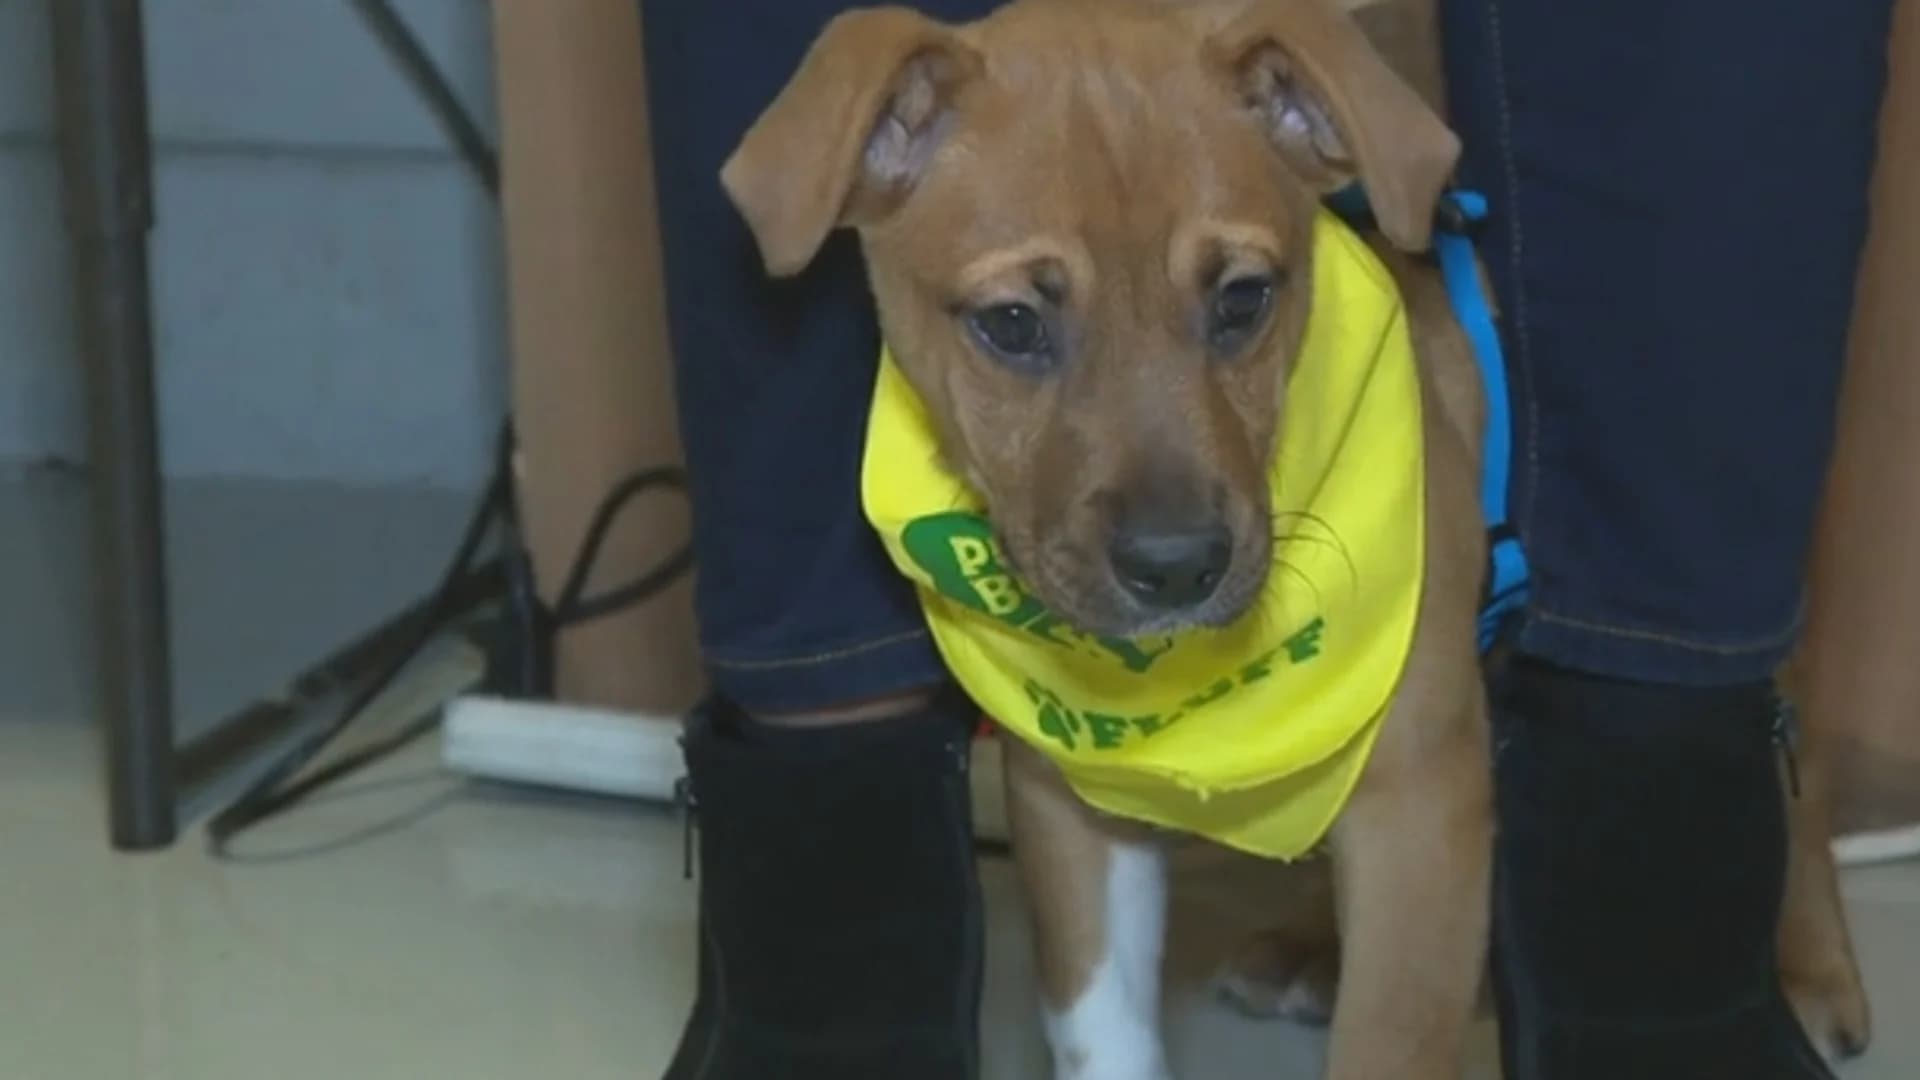 News 12 goes behind the scenes for exclusive look at Puppy Bowl XV